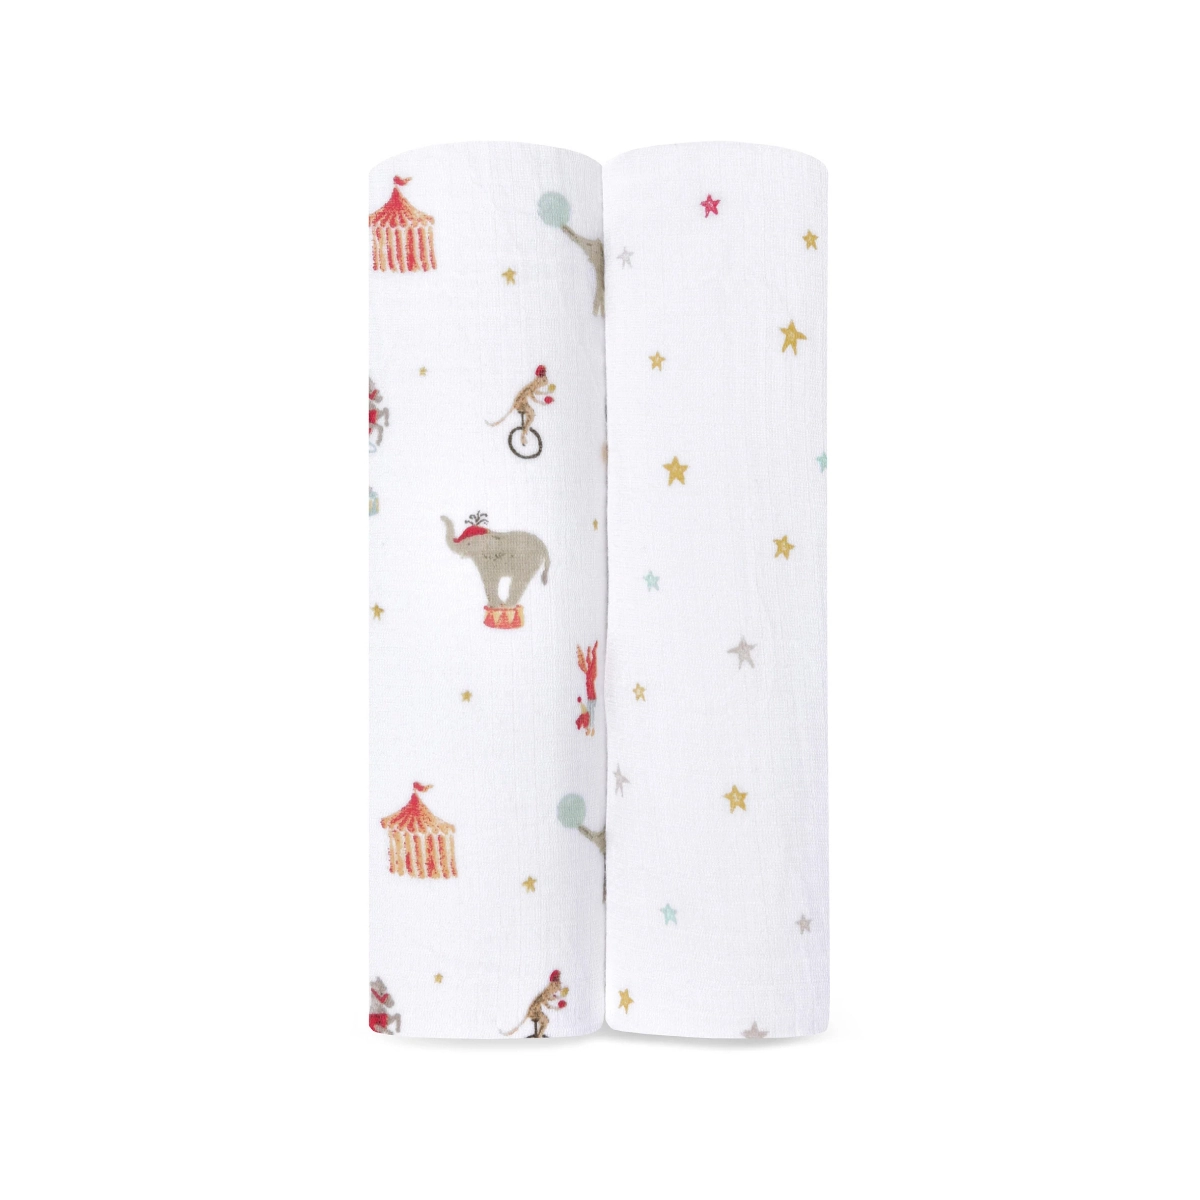 Aden + Anais Pack of 2 Essentials Cotton Muslin Swaddle Blanket